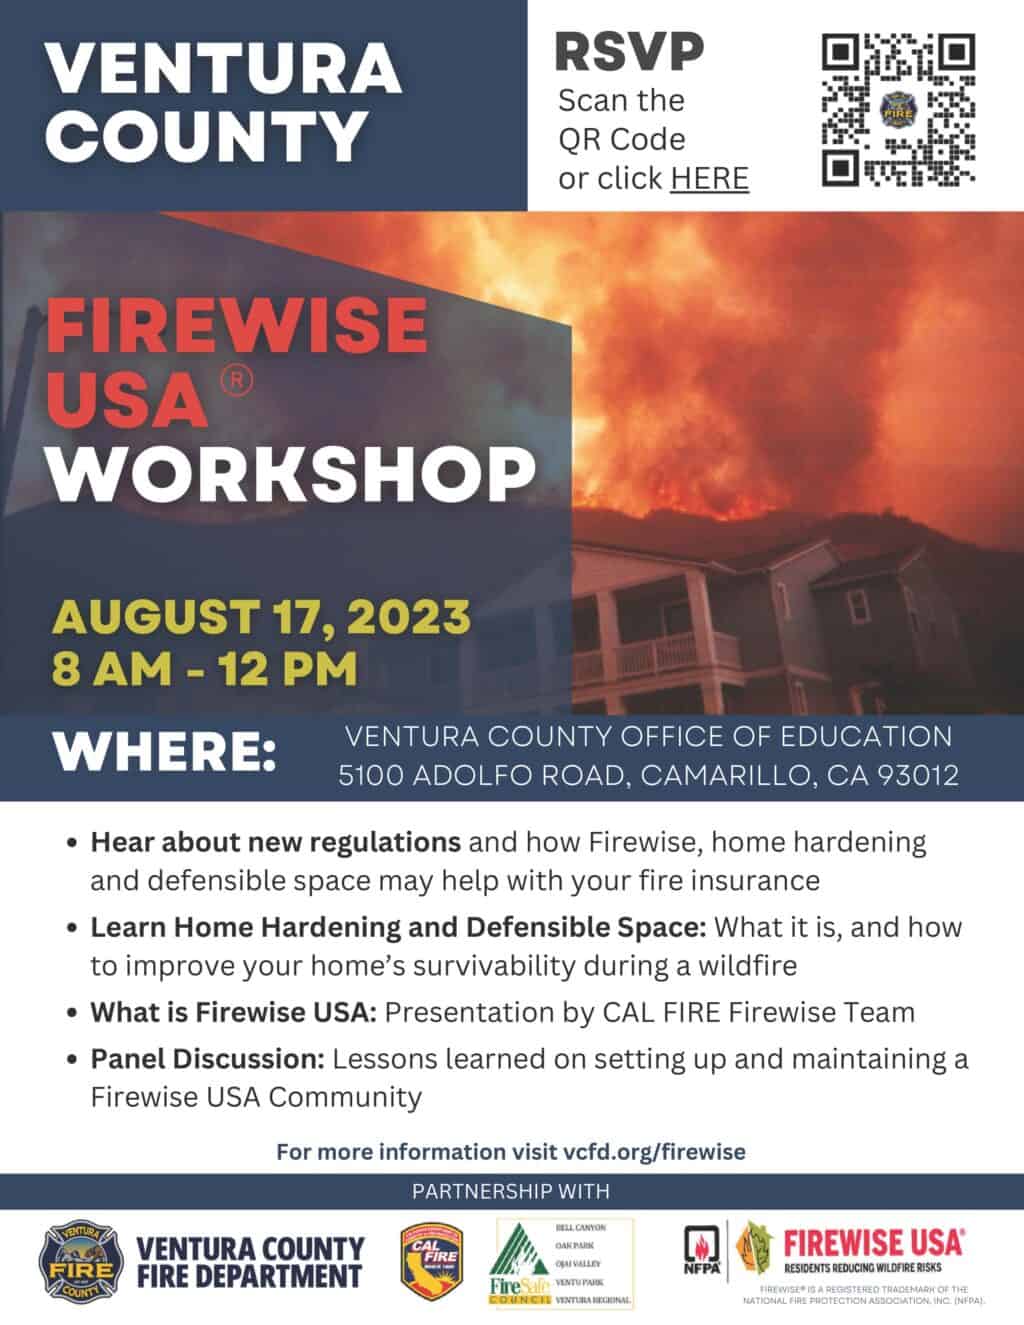 WELCOME TO FIREWISE USA® COMMUNITIES – Ventura County Fire Department